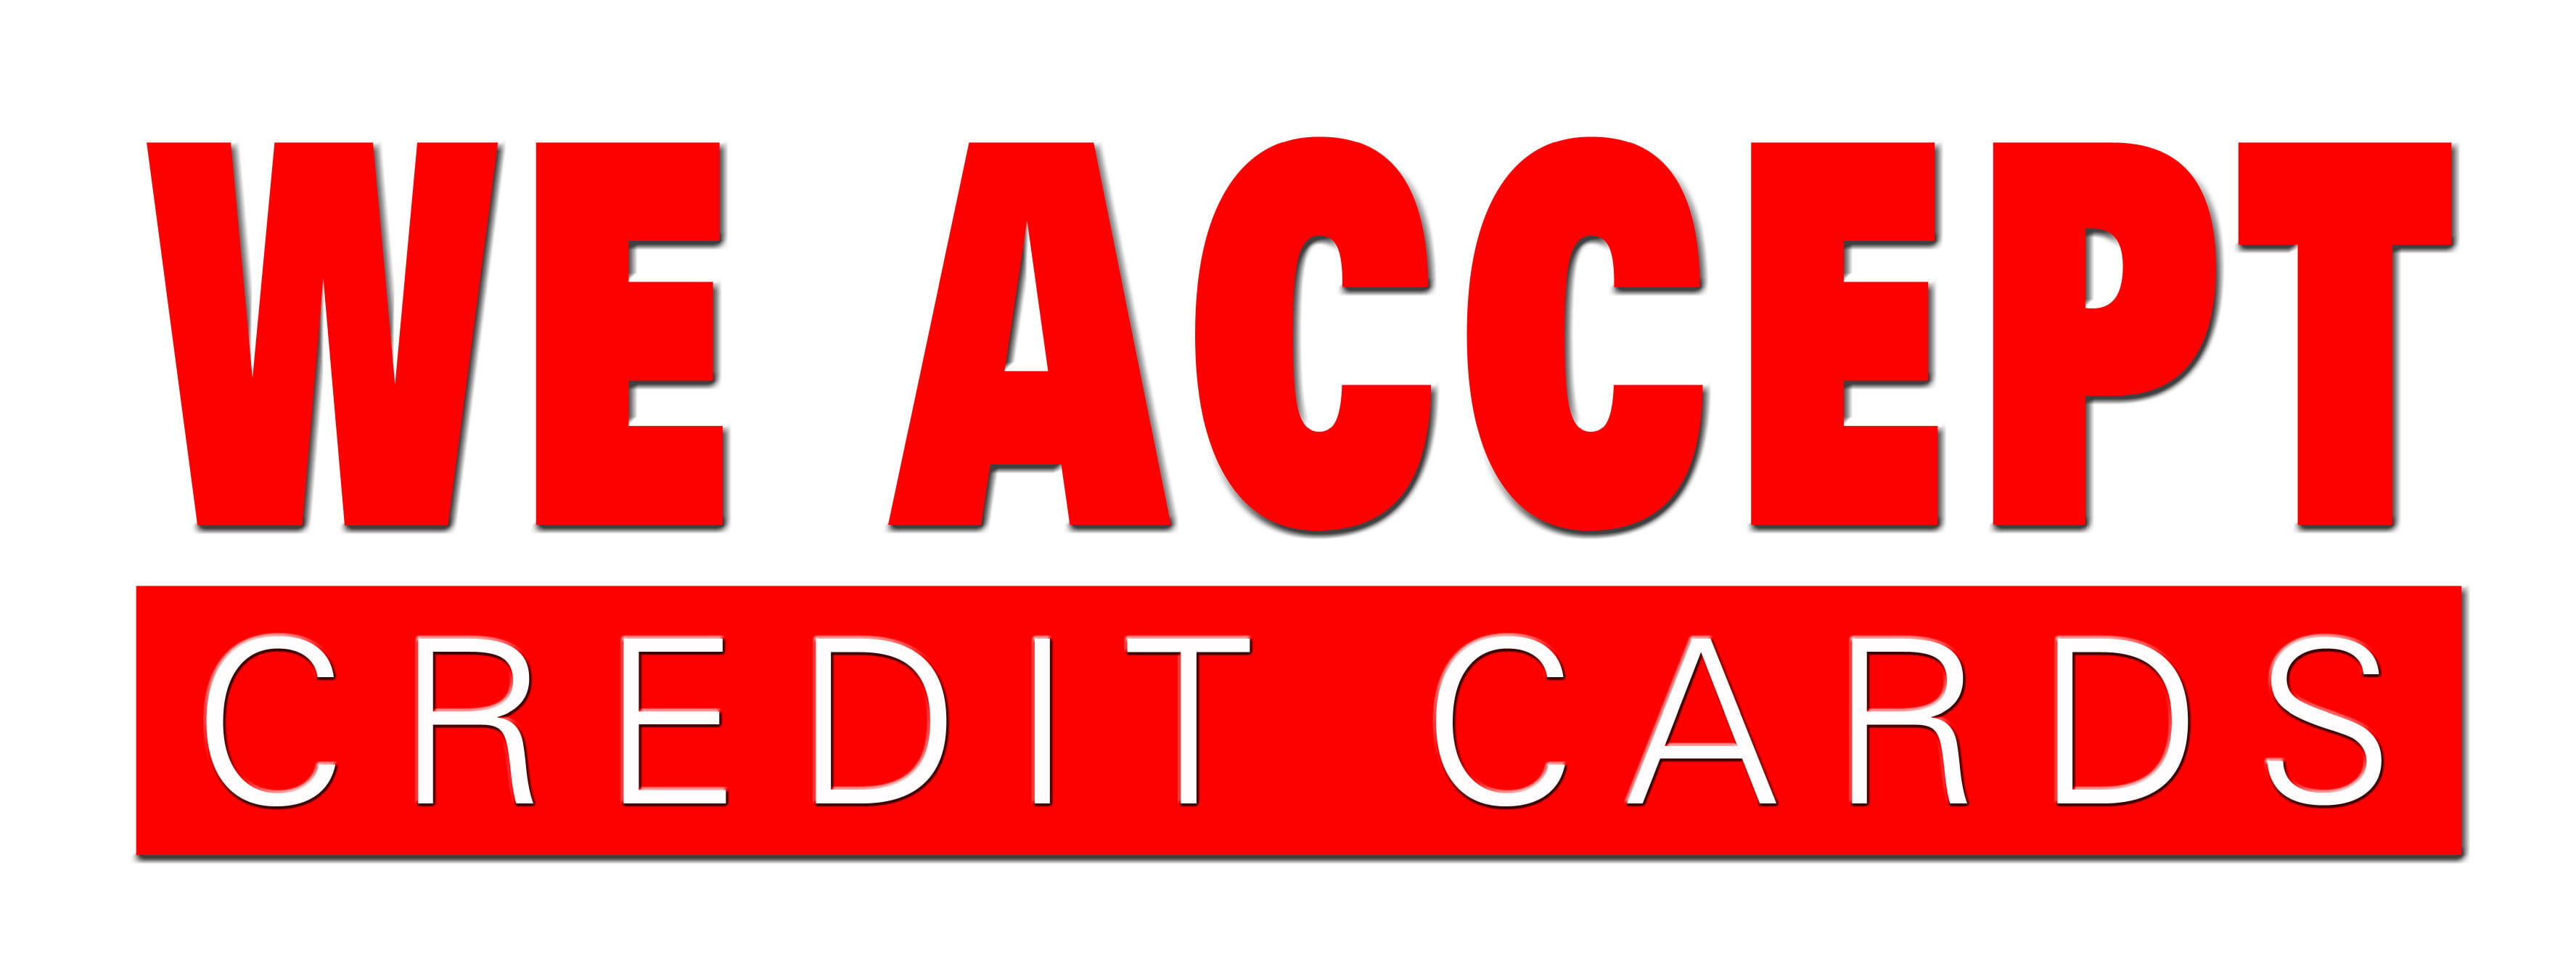 We accept Credit Cards Decal 12" Concession Food Truck Restaurant Sticker 